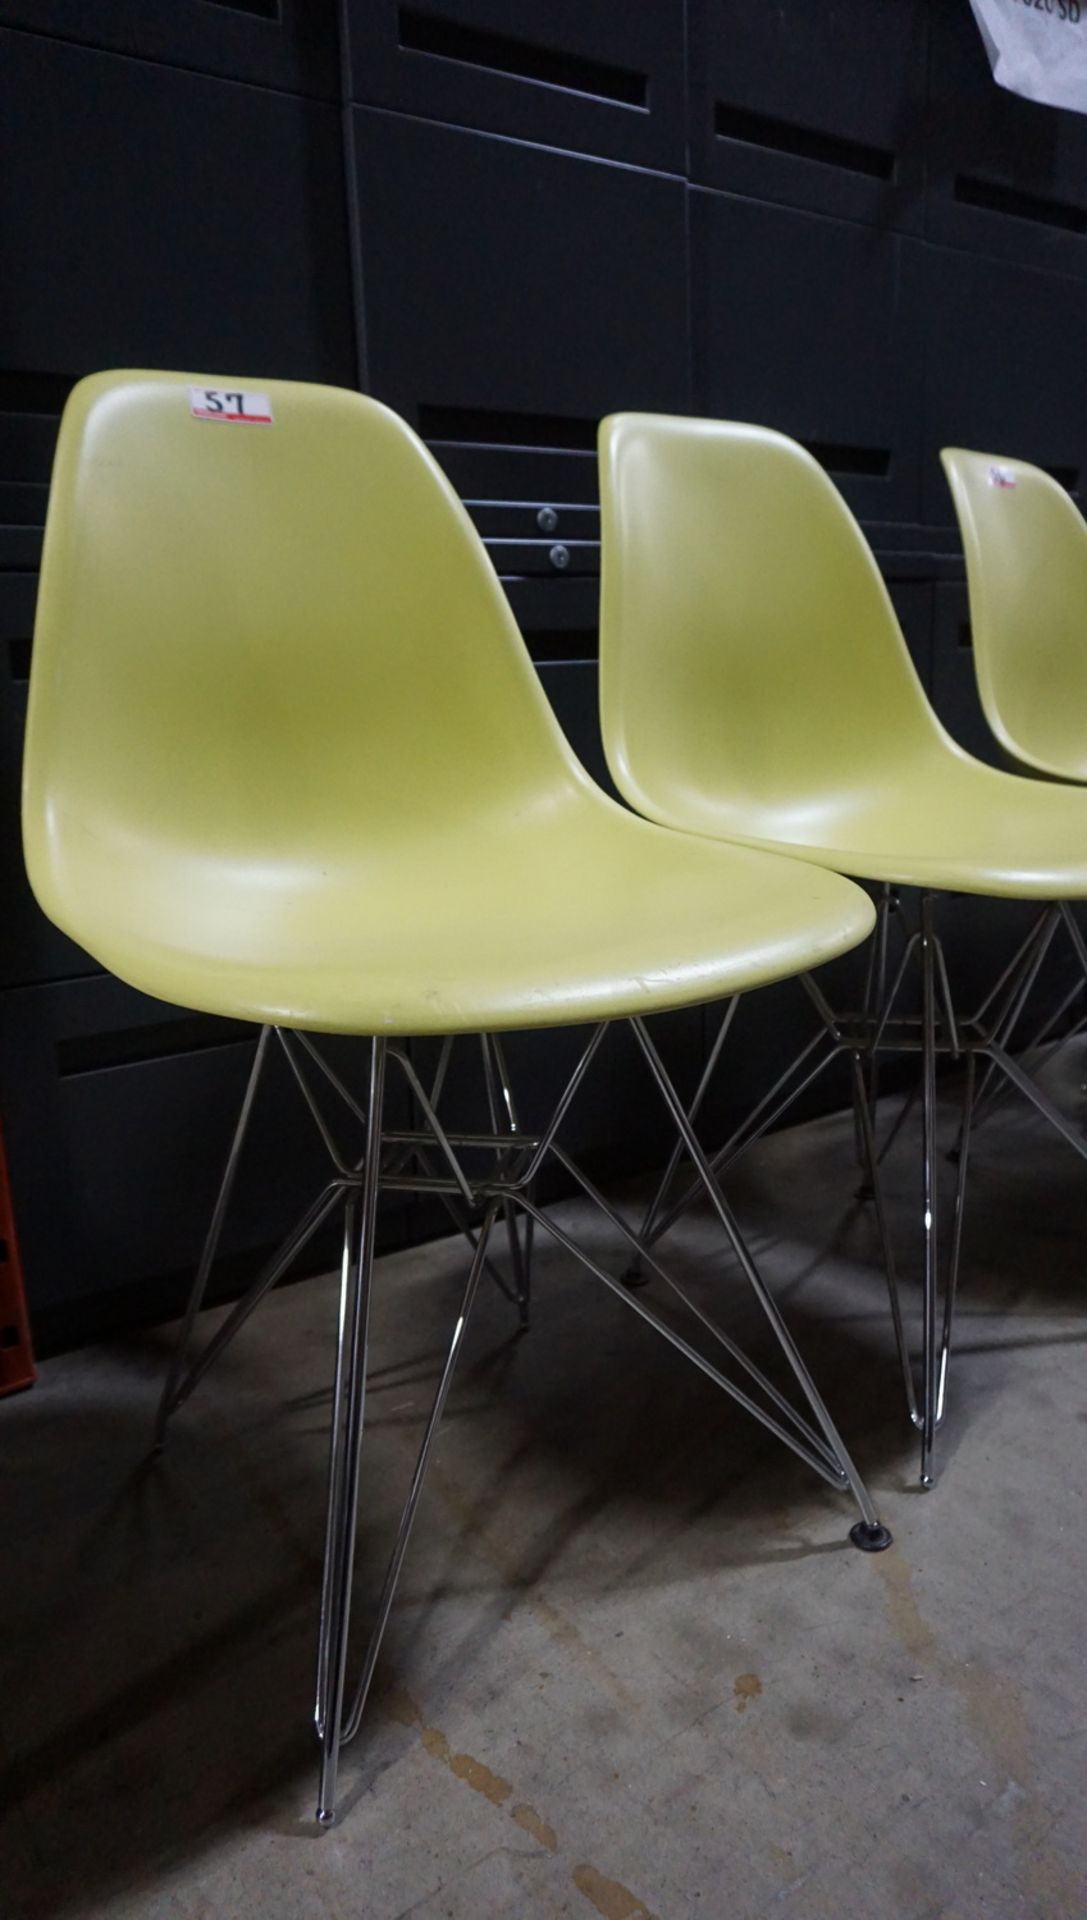 UNITS - HERMAN MILLER EAMES MOLDED PLASTIC SHELL CHAIR W/ EIFFEL TOWER BASE (CHARTREUSE) (MSRP $